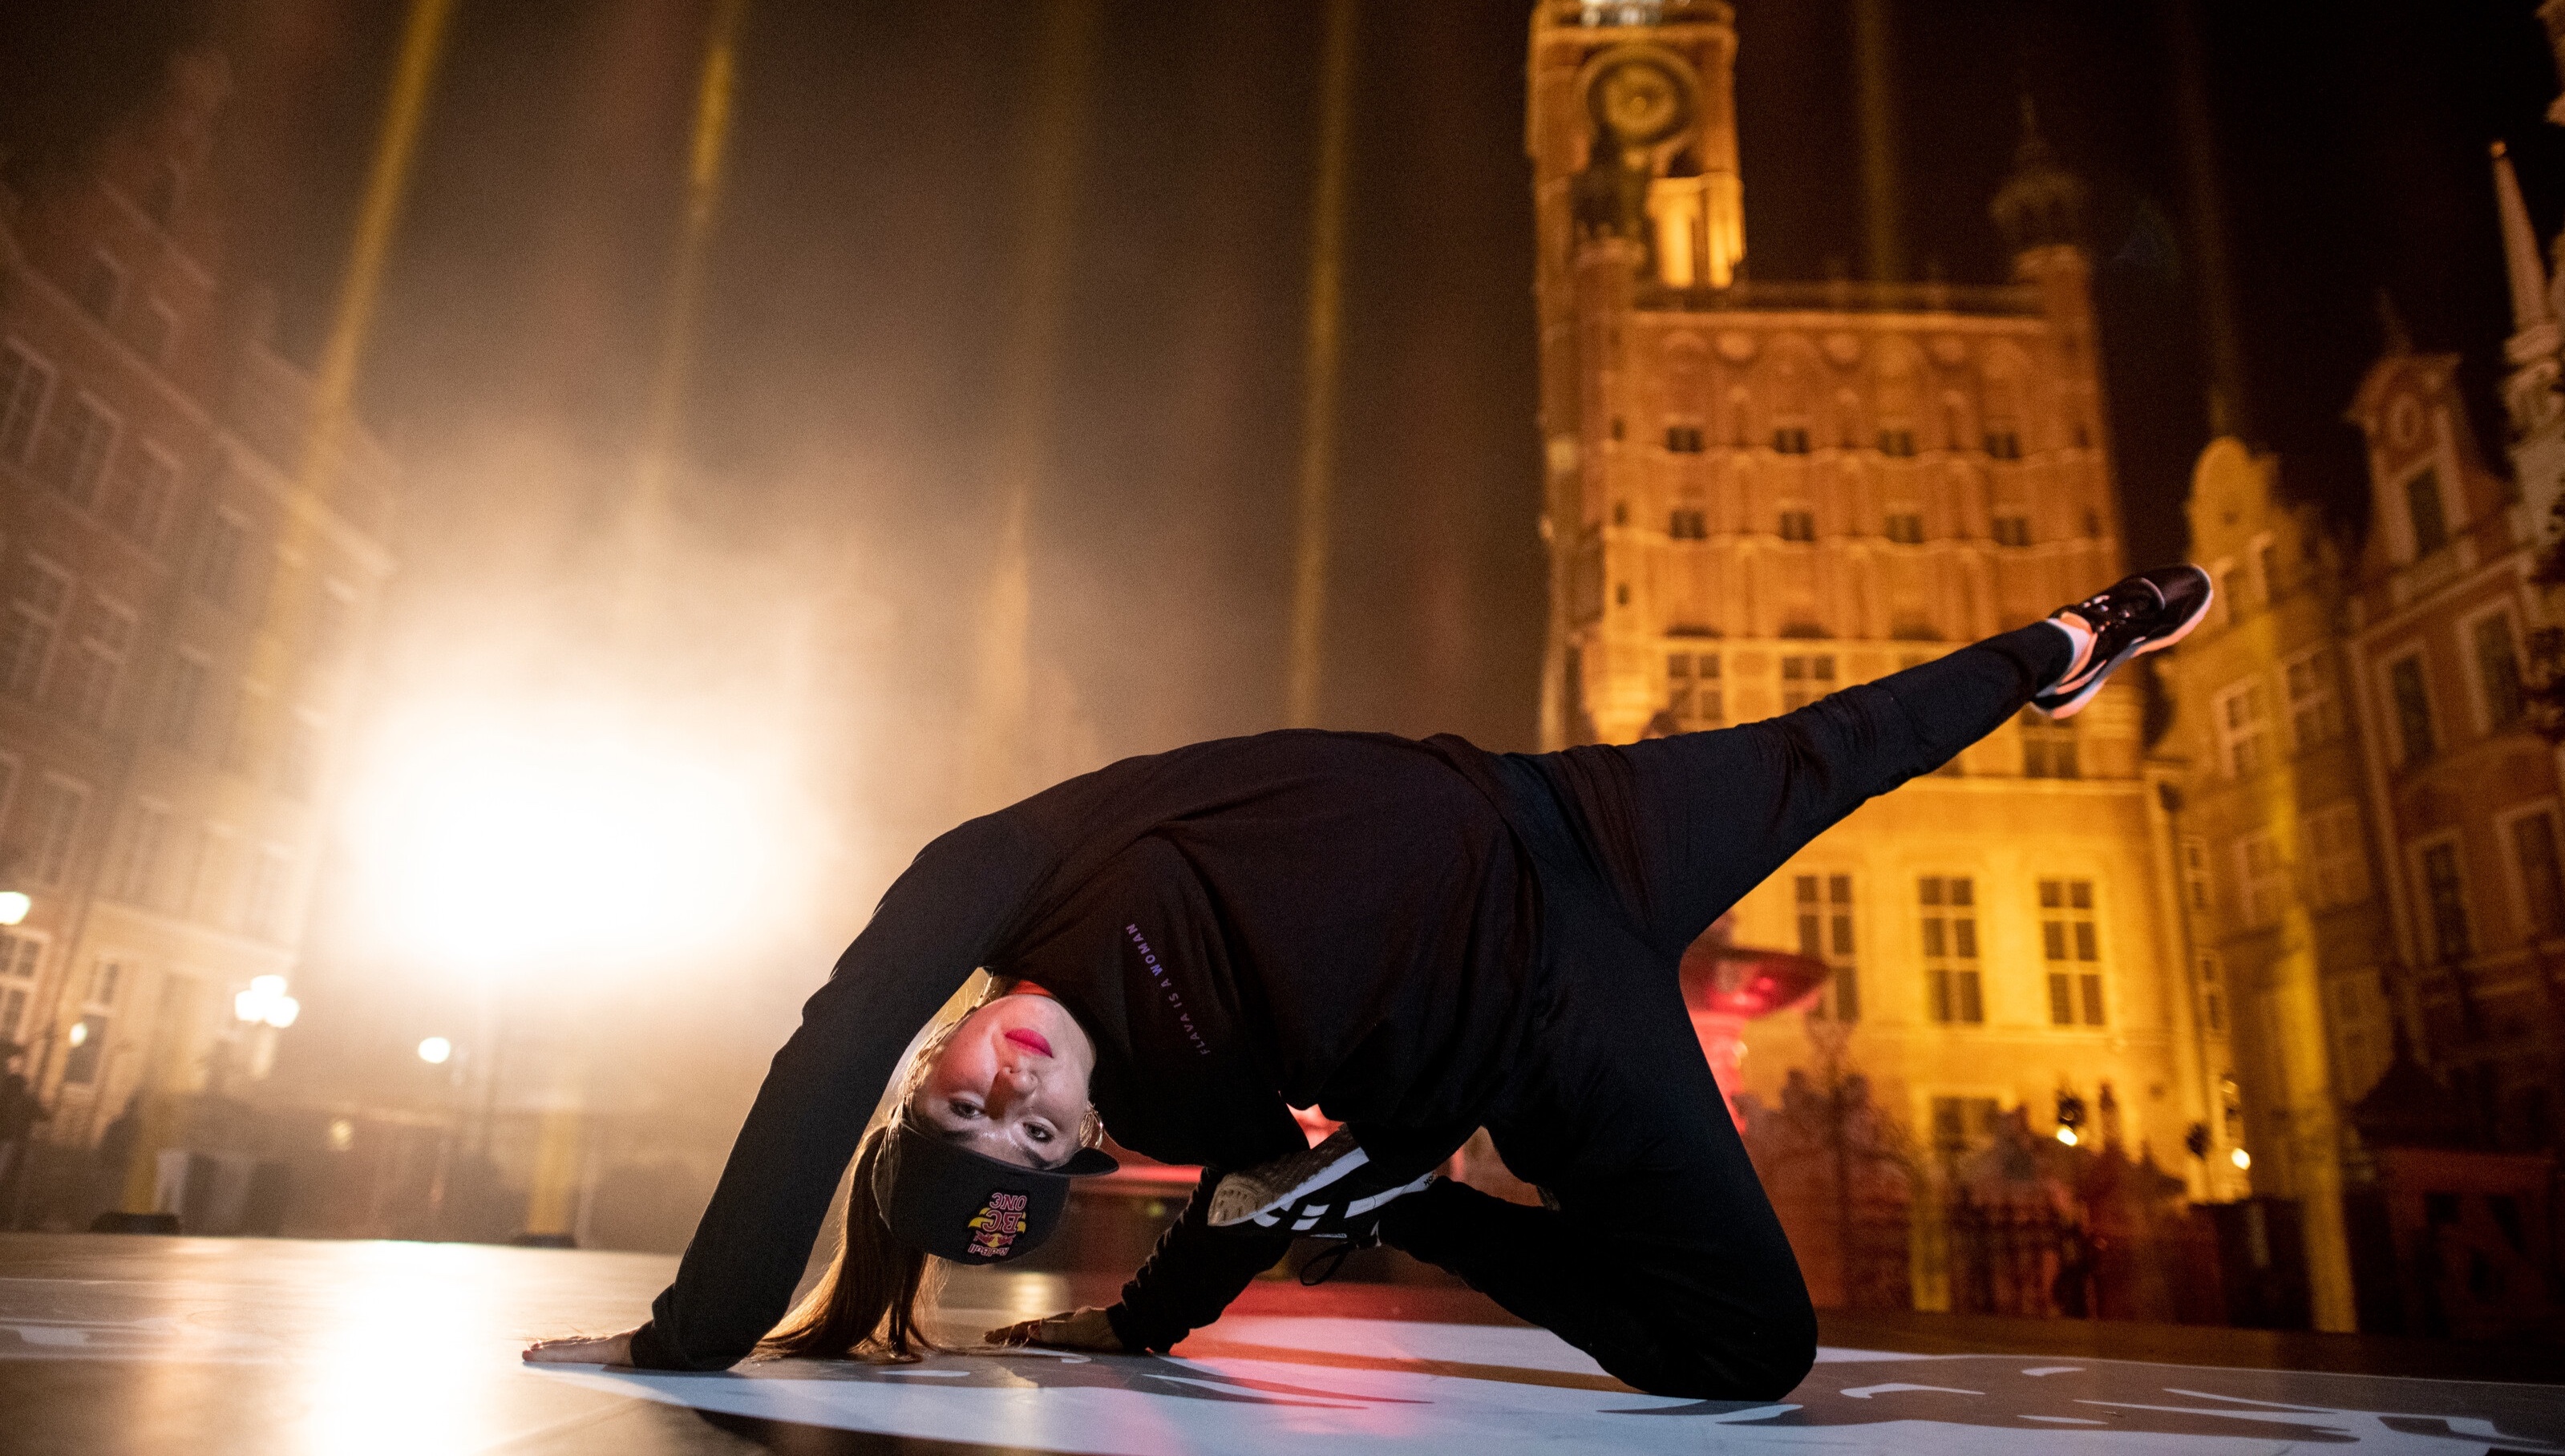 Gdansk will become the international capital of breakdance